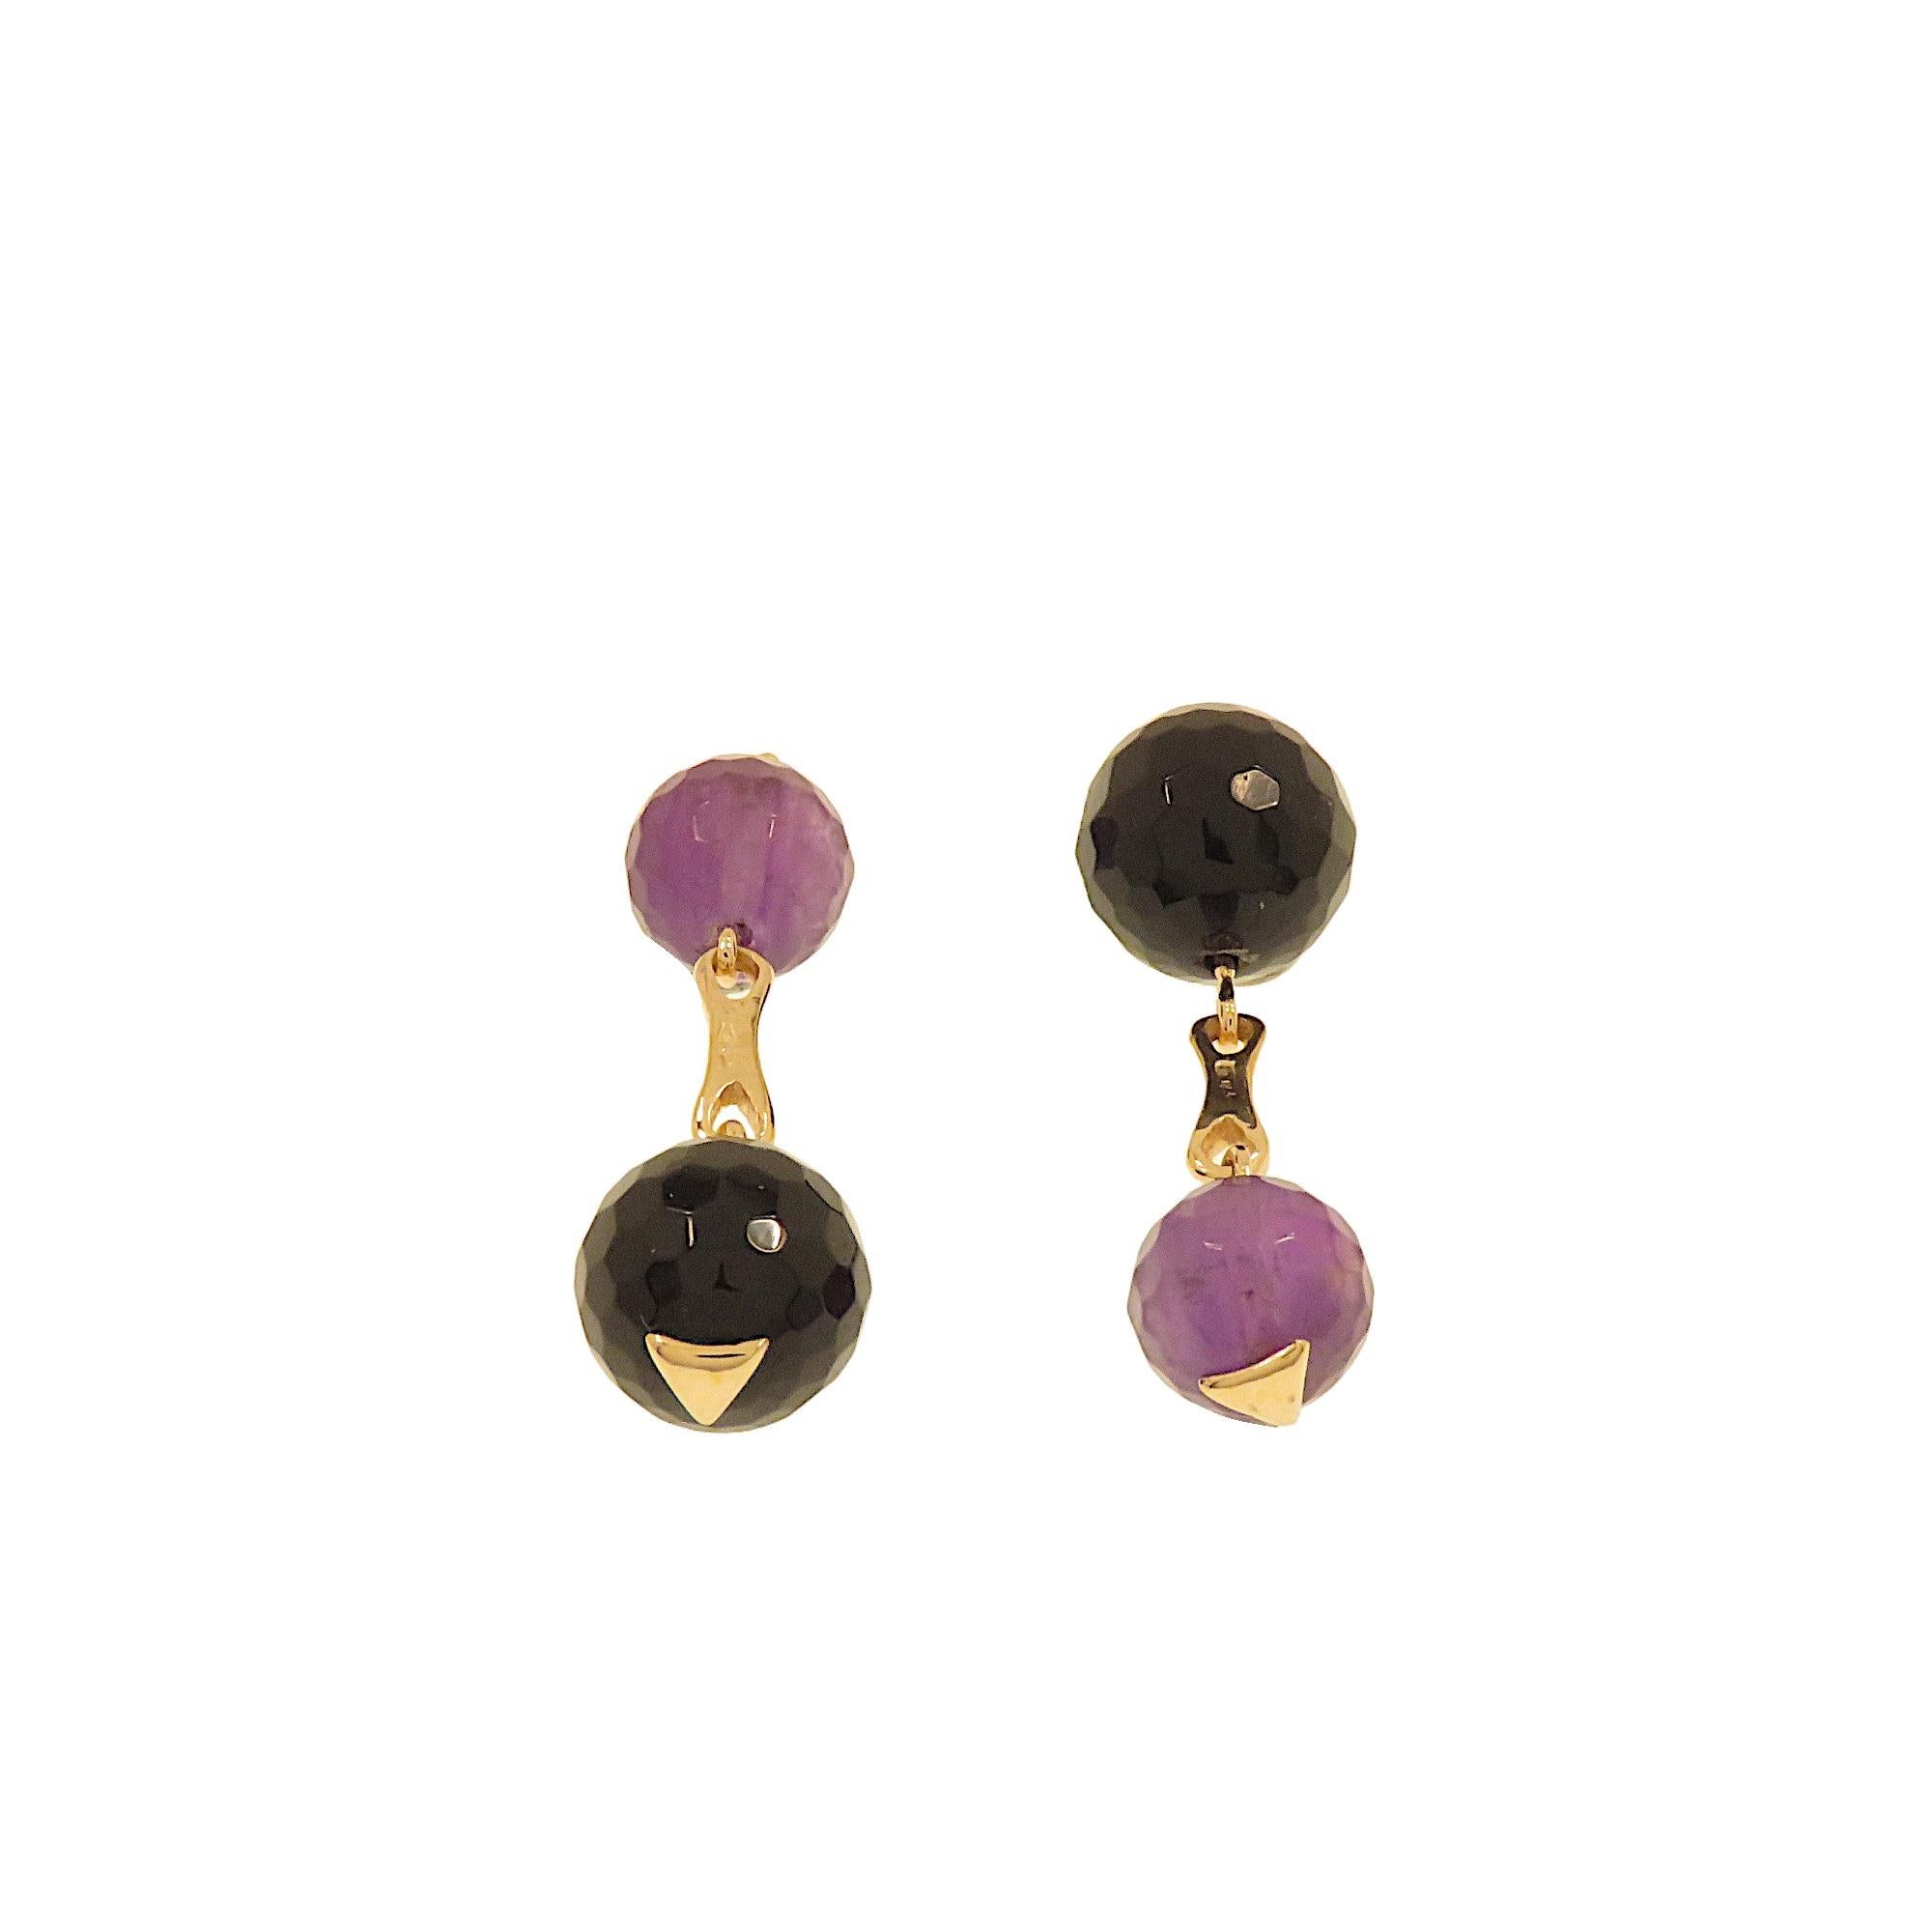 Elegant minimalist cufflinks created by hand in 9k rose gold with onyx and amethyst. The combination of colors and choice of stones make these jewels whimsical and unique. They were made in our goldsmith's workshop in Milan by expert hands and